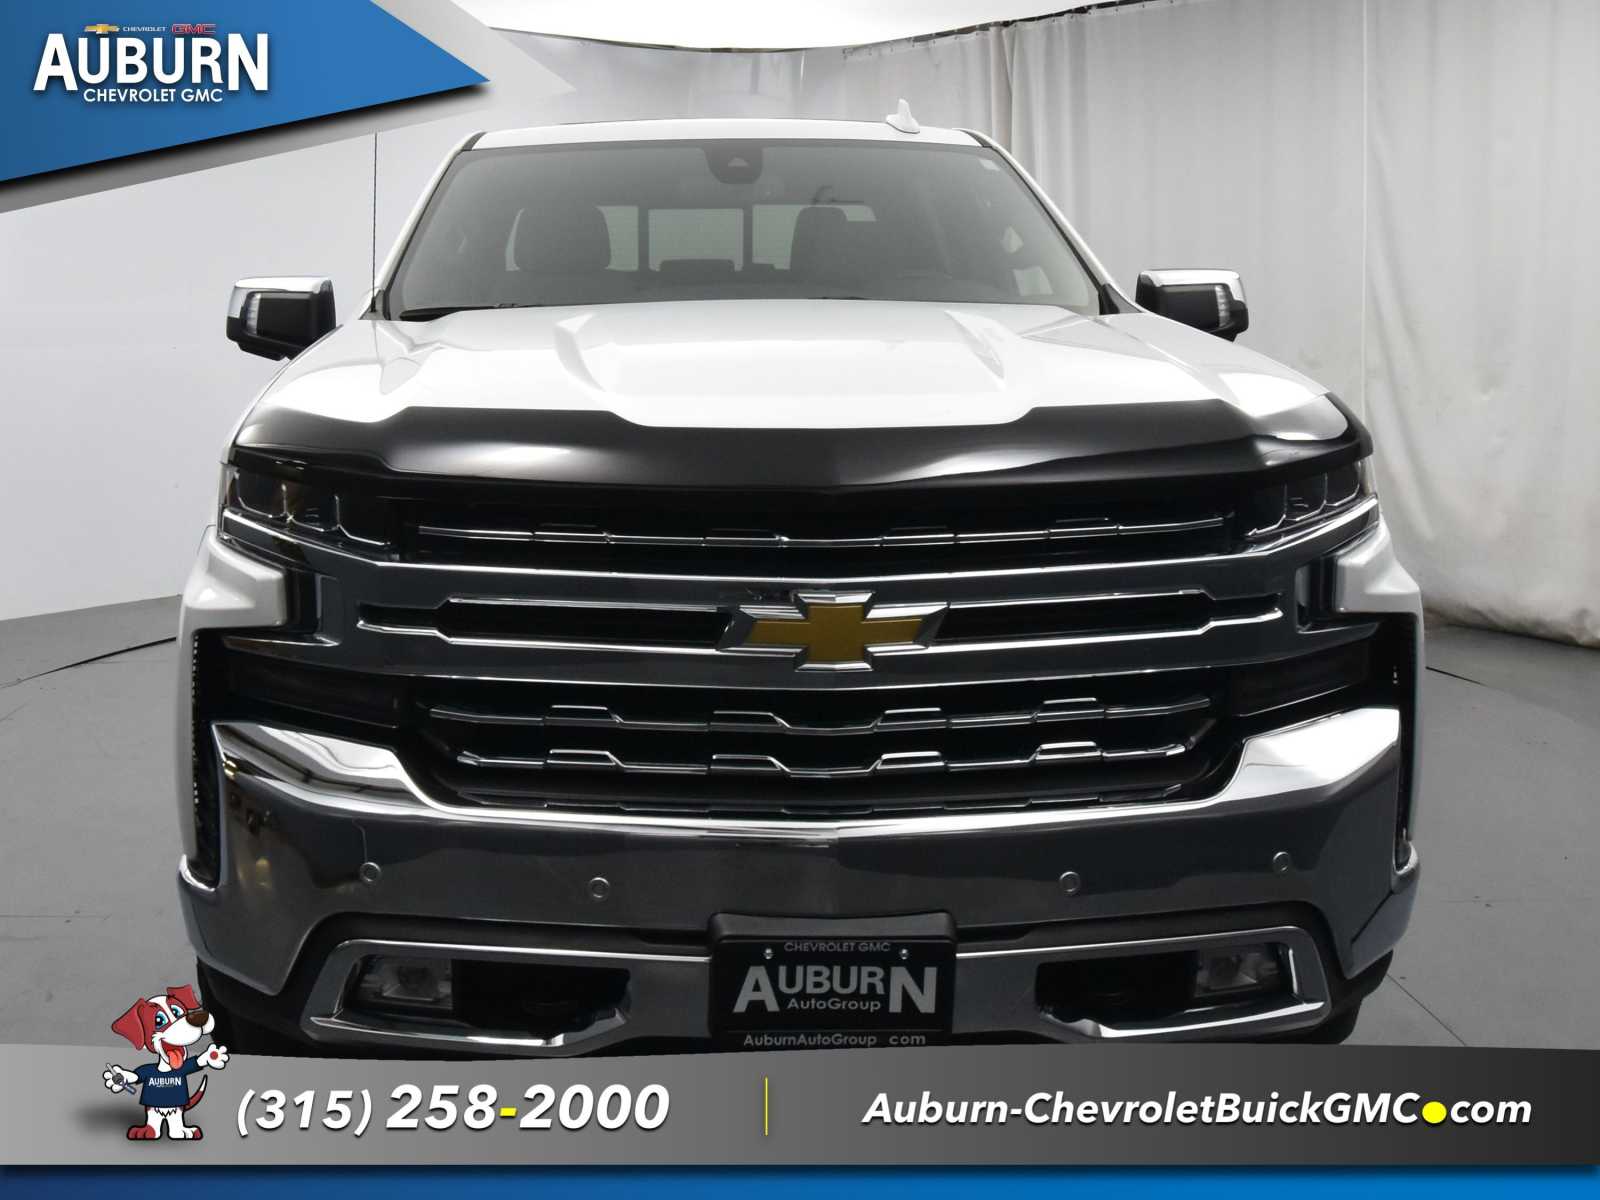 Used 2021 Chevrolet Silverado 1500 LTZ with VIN 1GCUYGED0MZ246689 for sale in Auburn, NY